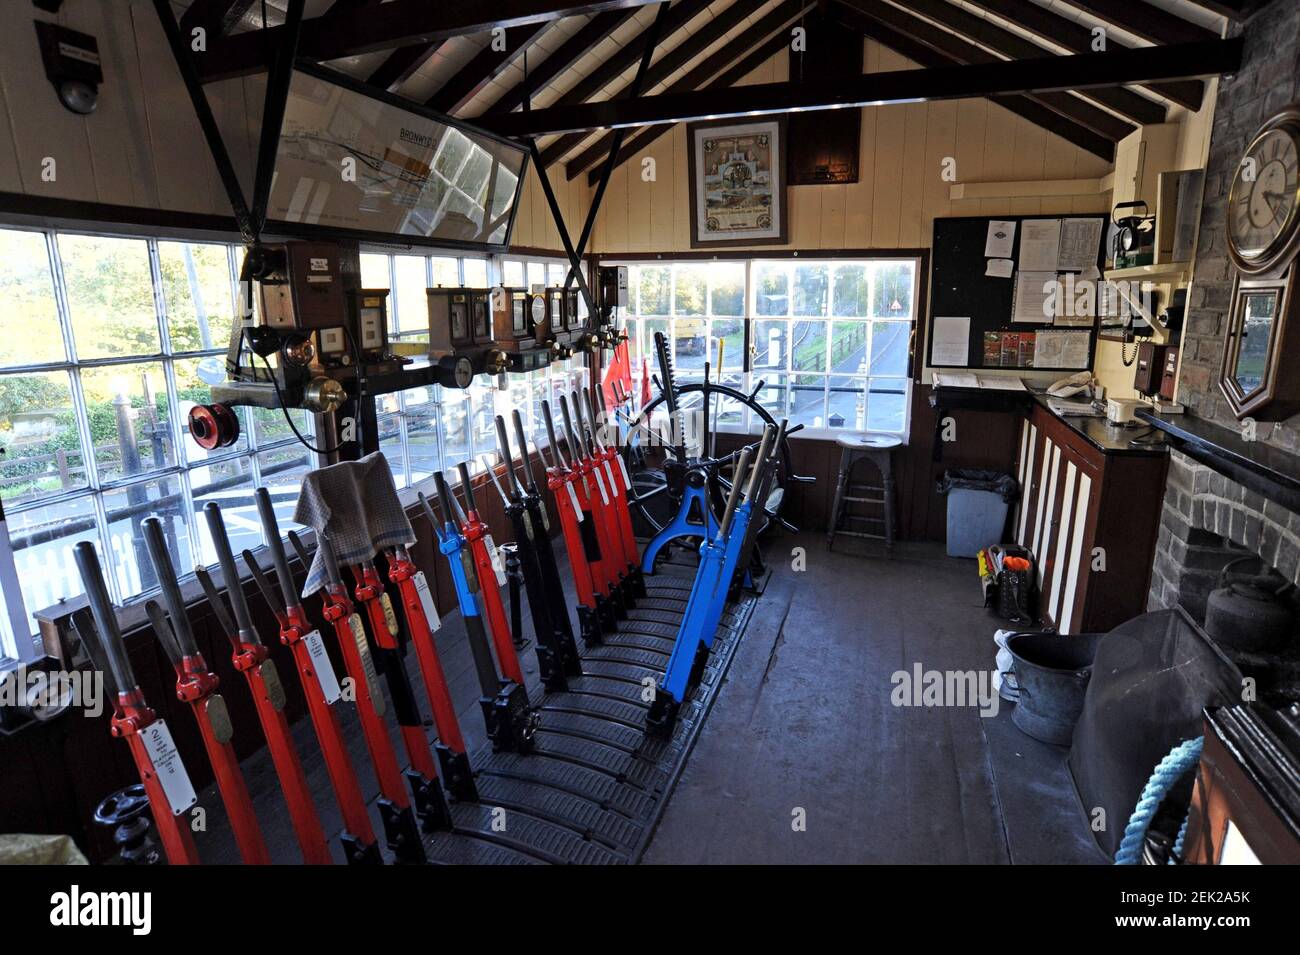 The former Llandybie station signal box from the Heart of Wales line, now in operation at the Gwili heritage railway, Carmarthenshire Stock Photo